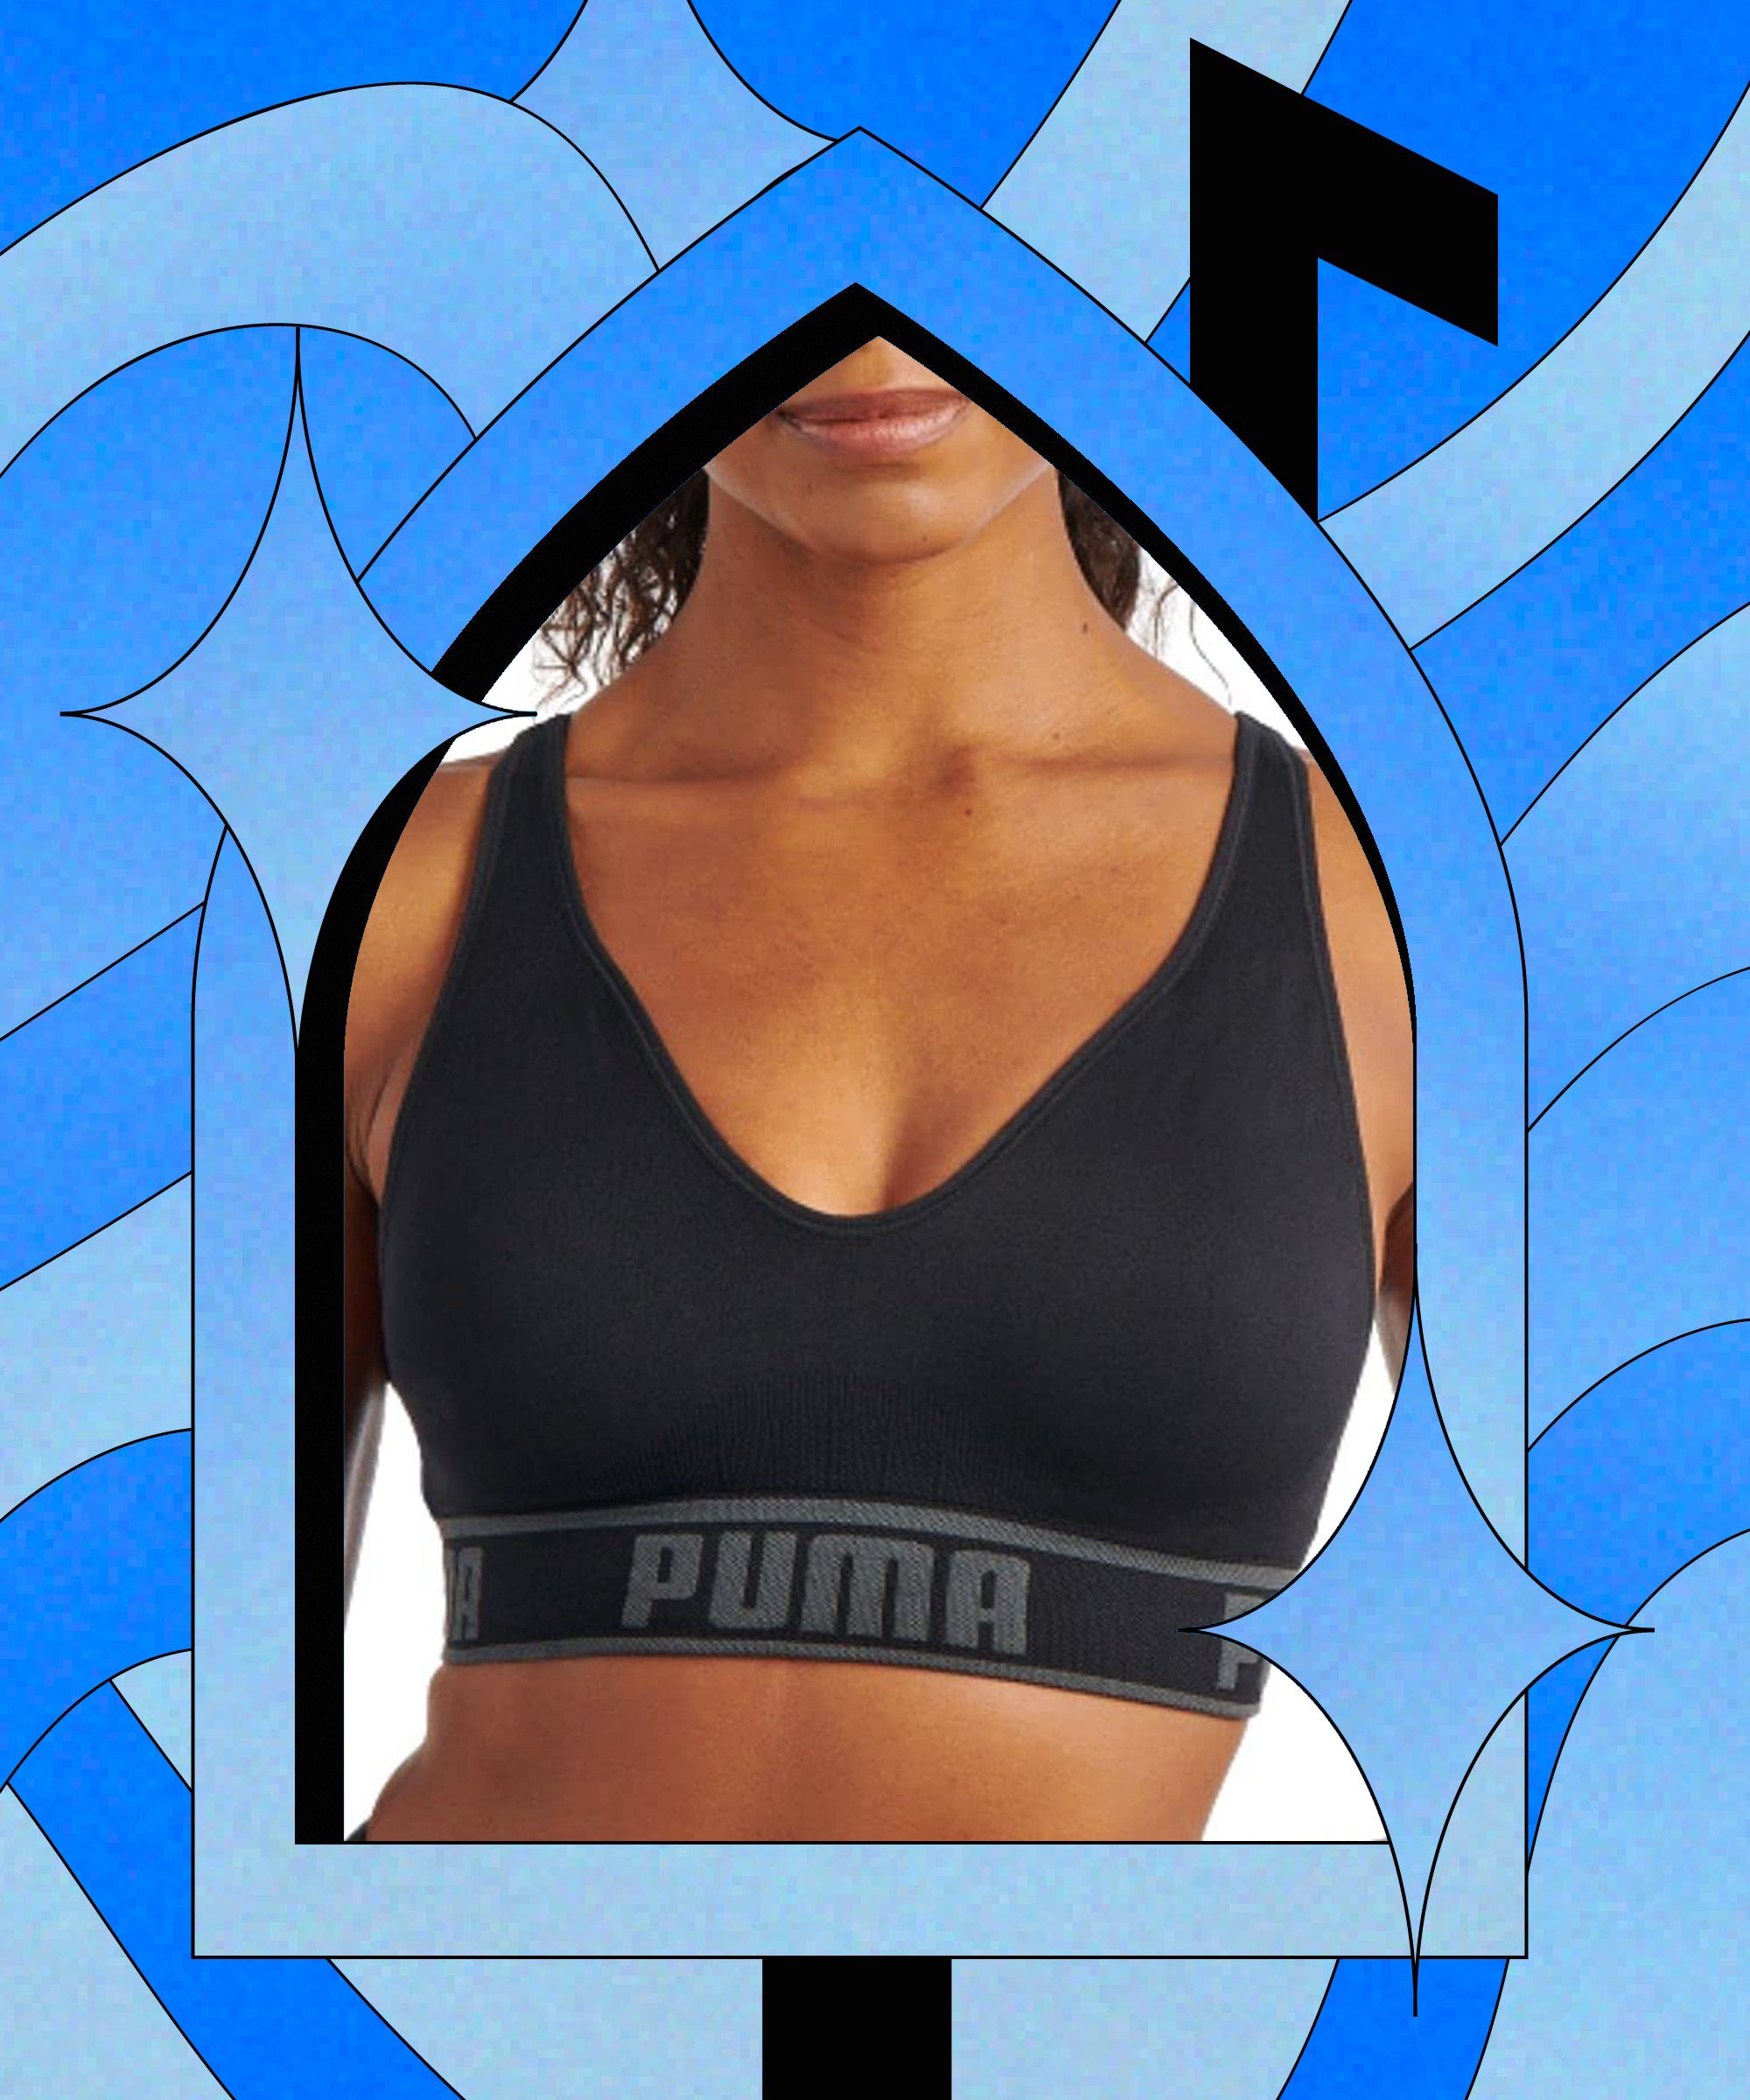 SHEFIT - THE Ultimate Sports Bra is the game changer you